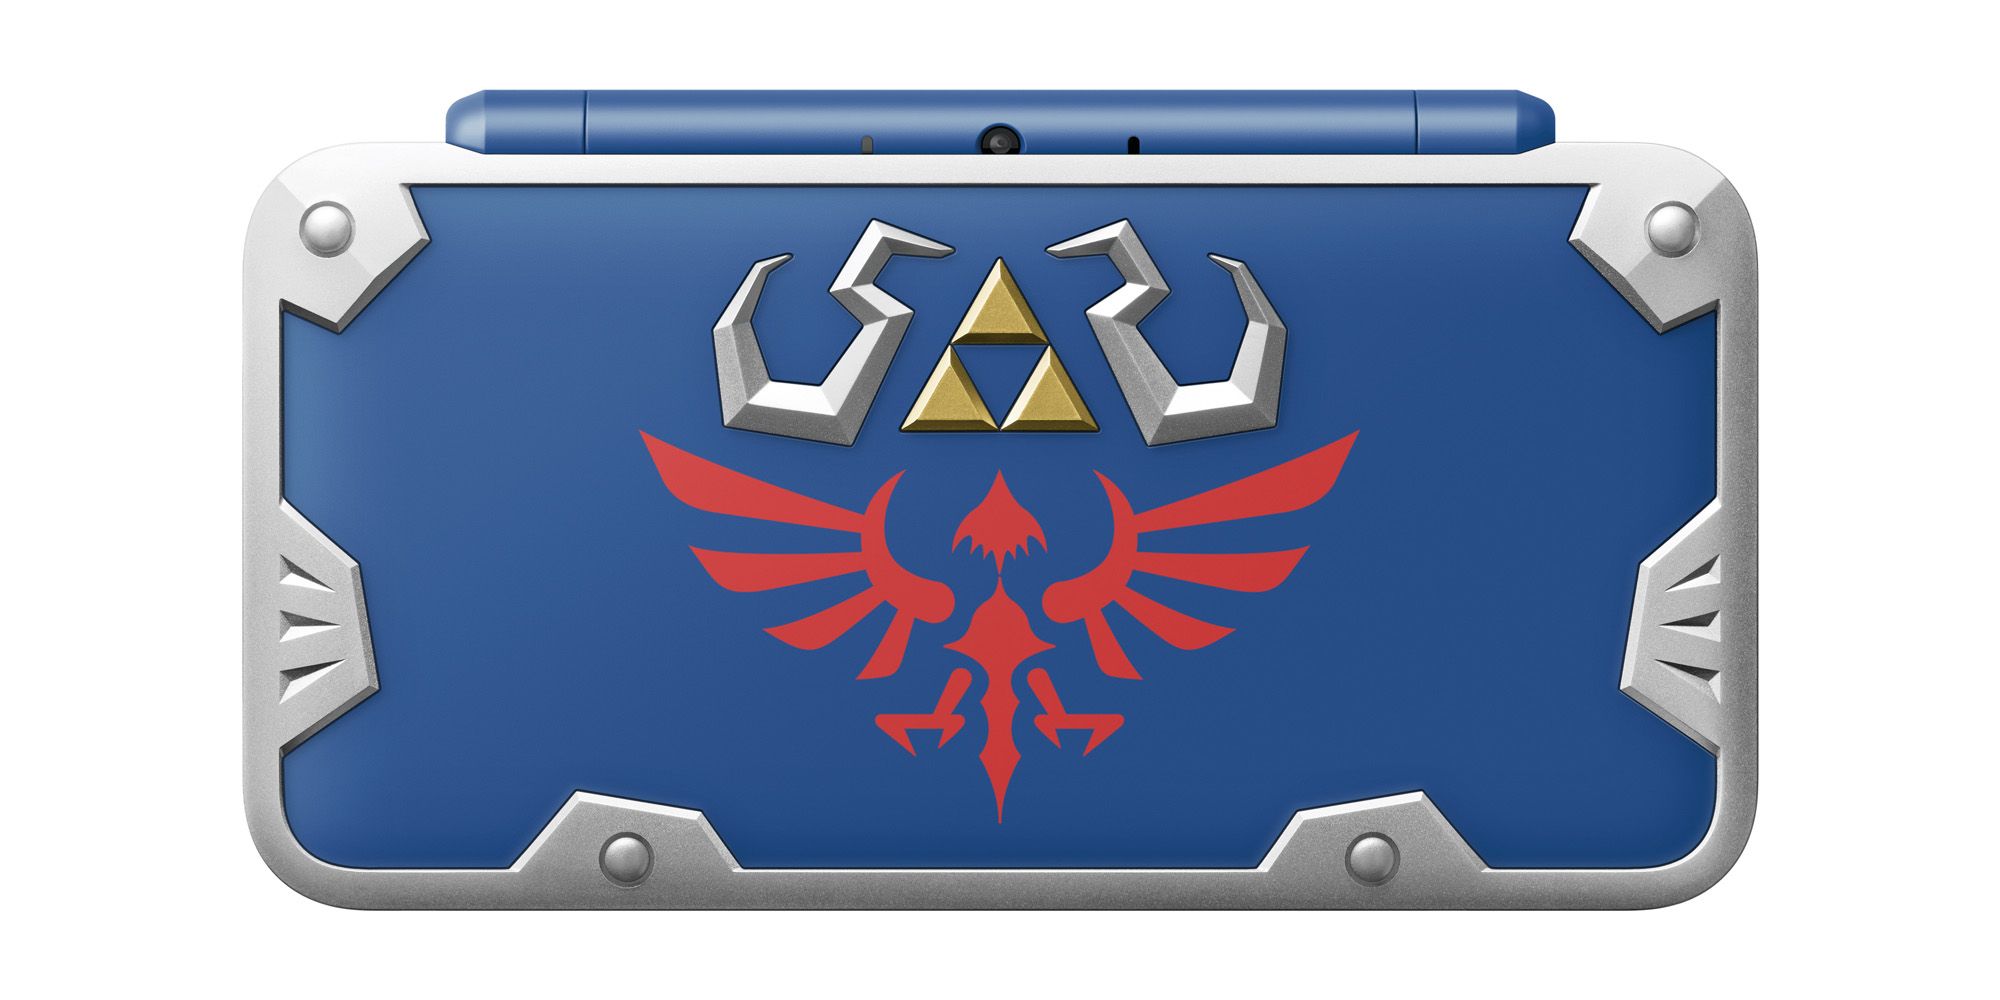 Blue 2DS XL designed after the Zelda Hylian Shield with a silver border, Hylian Crest, and Triforce.